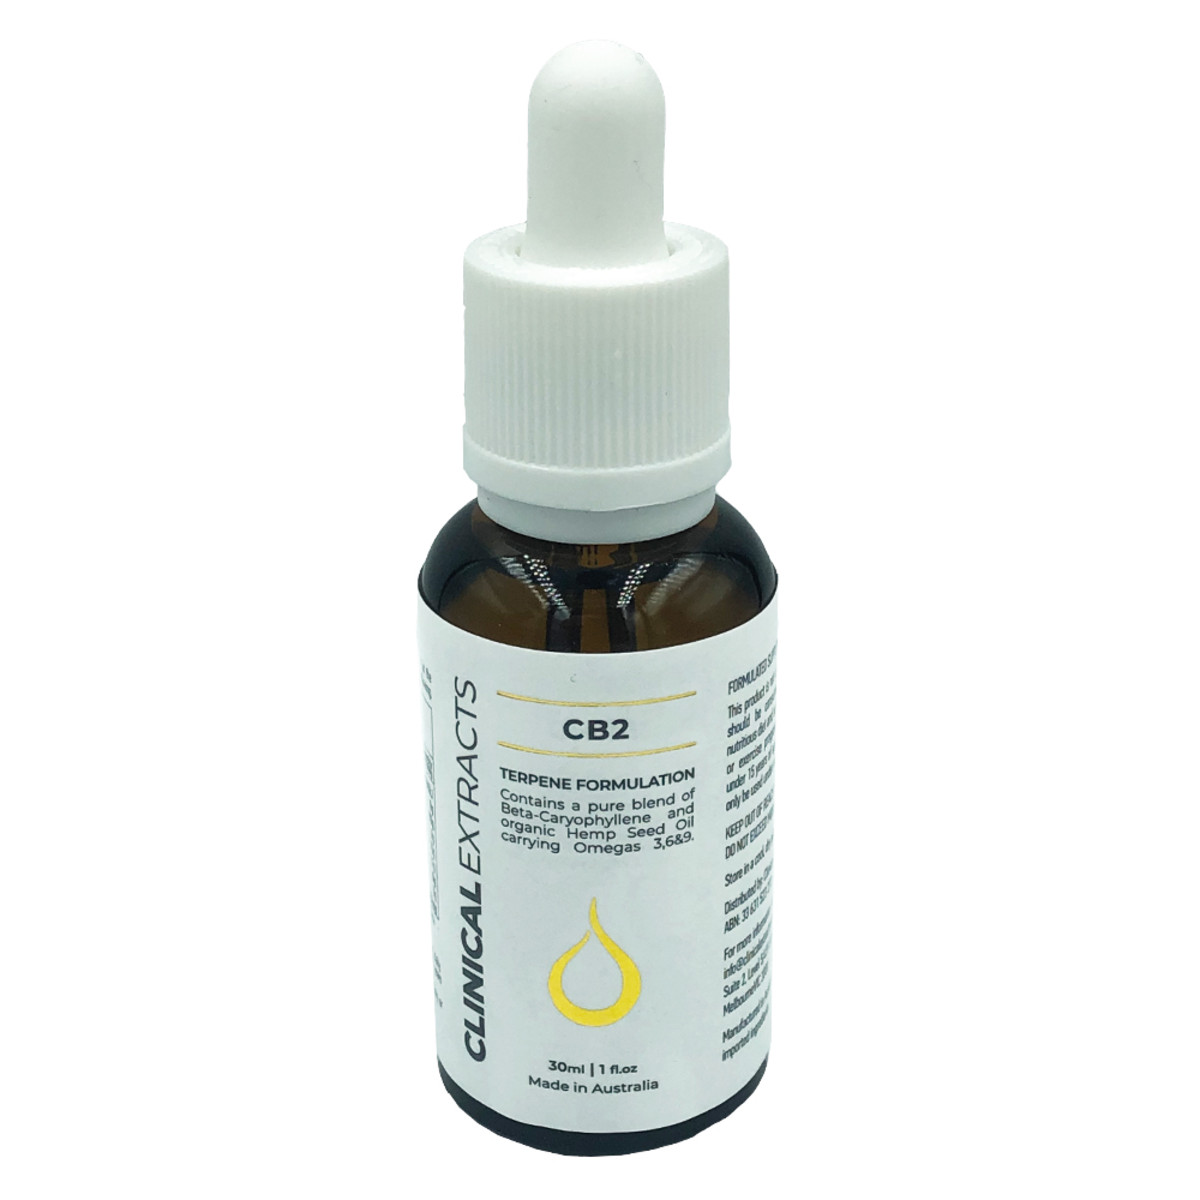 CLINICAL EXTRACTS - Terpene Formulation CB2 30ml